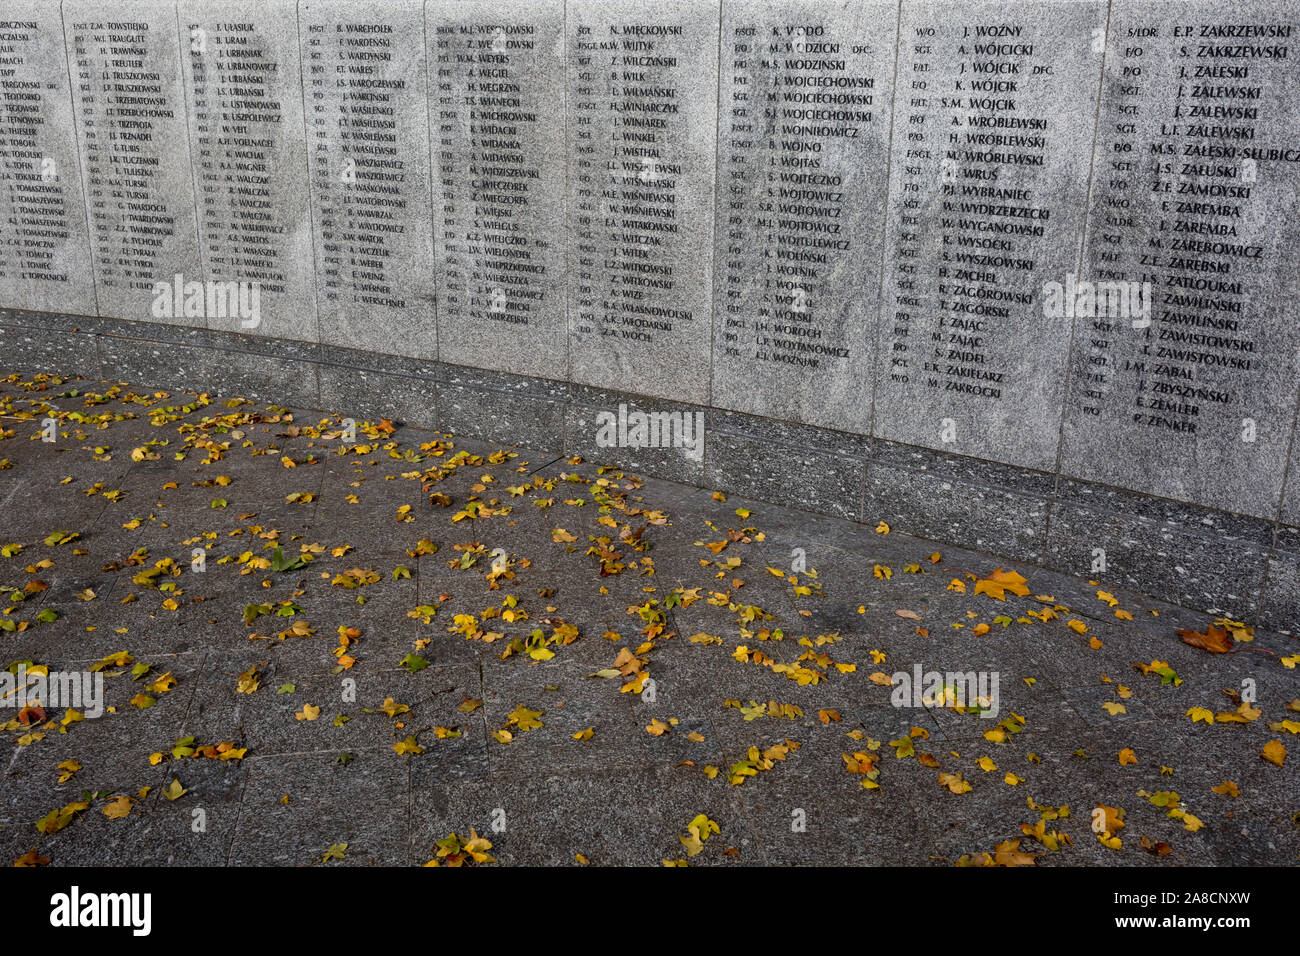 Among autumn leaves are the names of fallen WW2 Polish air crew at the Polish War Memorial, on 6th November 2019, in South Ruislip, Northolt, London, England. The Polish War Memorial is in memory of airmen from Poland who served in the Royal Air Force as part of the Polish contribution to World War II. The memorial was designed by Mieczyslaw Lubelski, who had been interned in a forced labour camp during the war. It is constructed from Portland stone with bronze lettering and a bronze eagle, the symbol of the Polish Air Force. The original intention was to record the names of all those Polish a Stock Photo